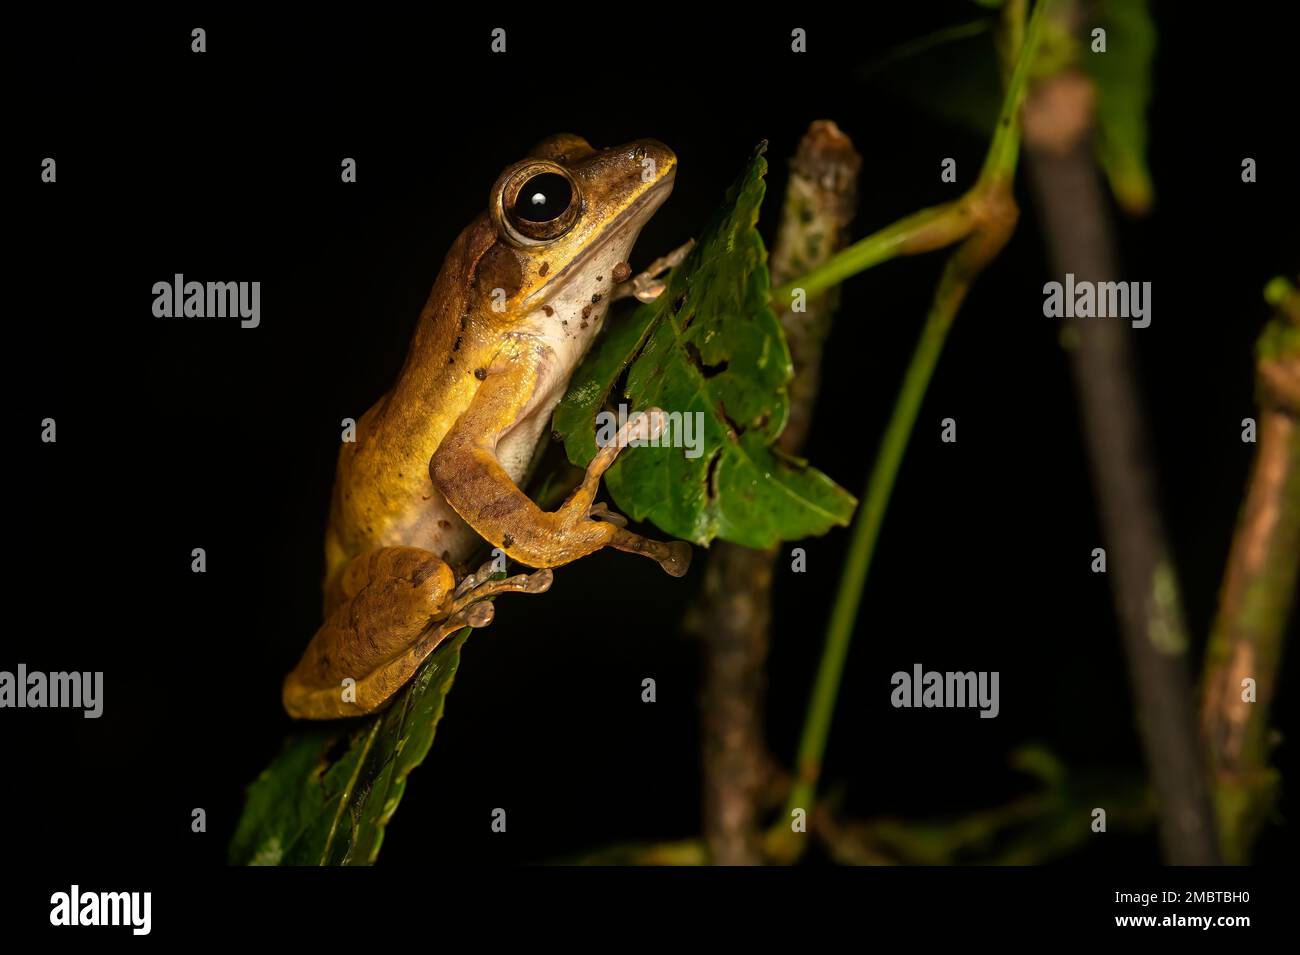 An Indian tree frog found in the jungles of Agumbe during a night walk on a rainy evening Stock Photo